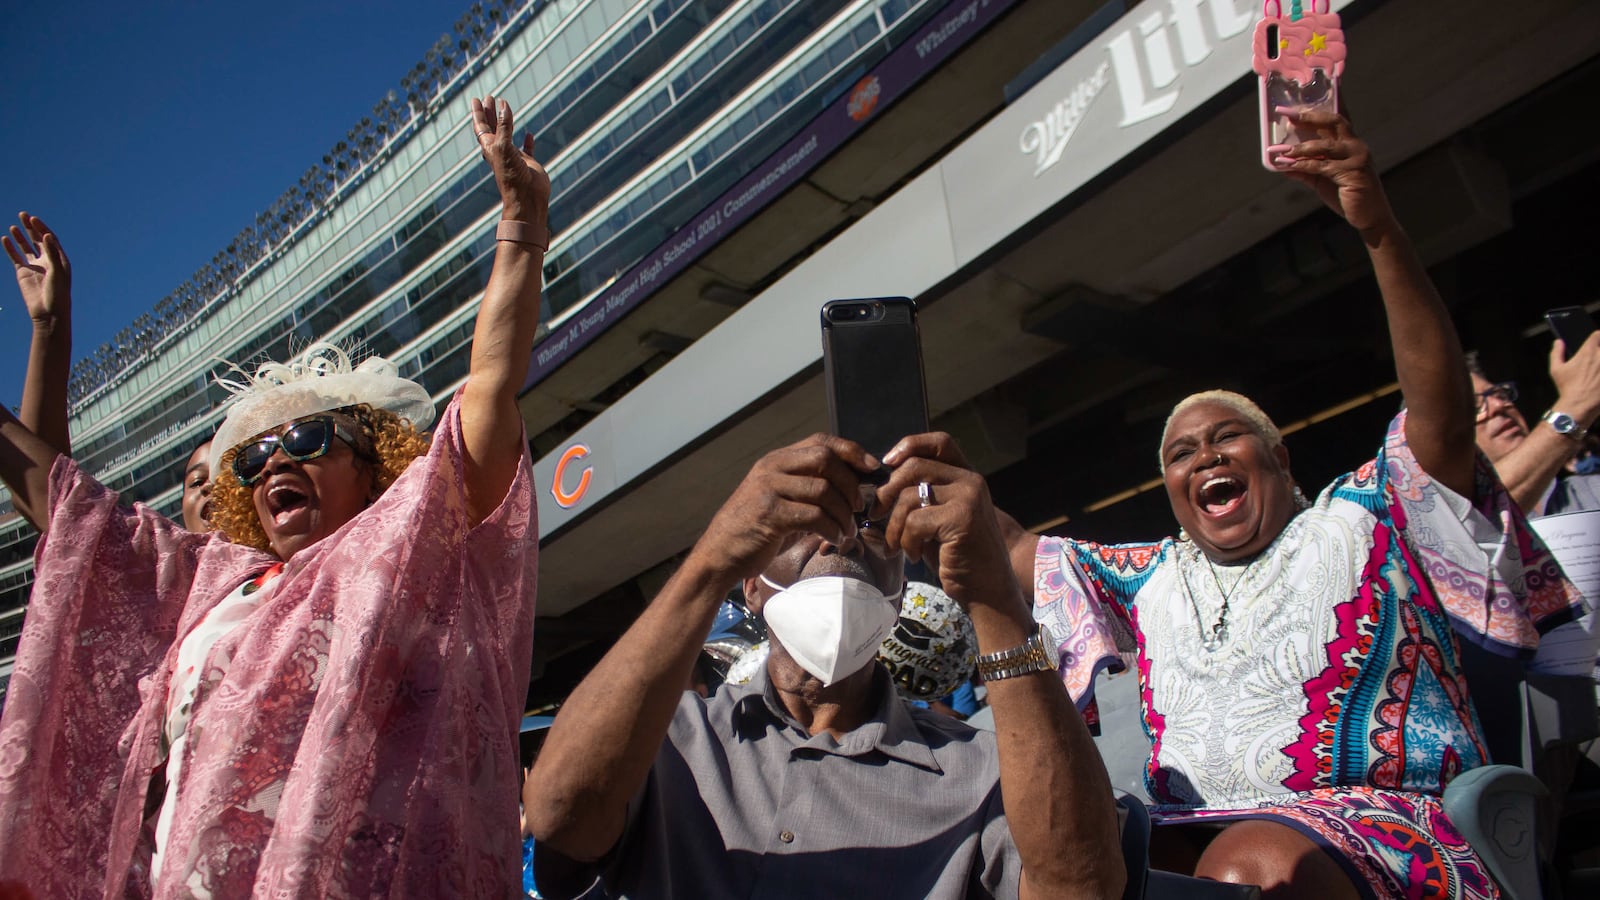 A woman wearing a pink shawl and sunglasses emphatically raises her arms as a man records on his cell phone, and a woman to the right wearing an intricate patterned dress excitedly cheers during a graduation ceremony.